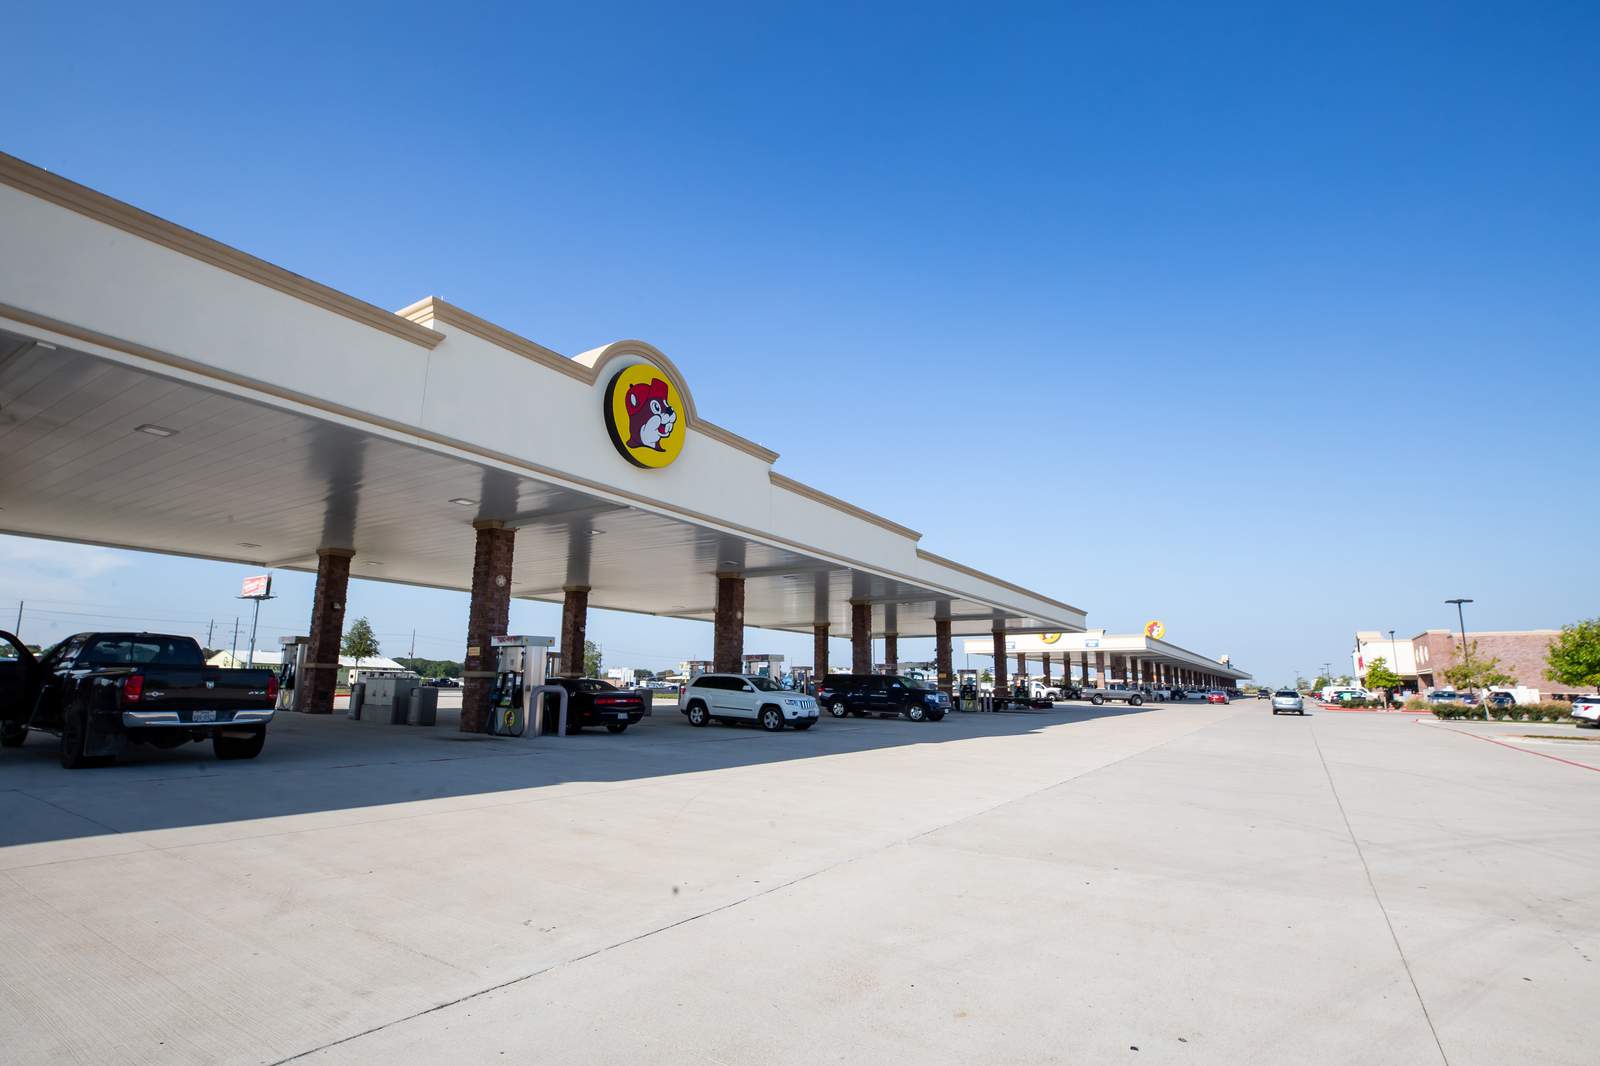 Save the date: Buc-ee’s announces grand opening for new Daytona Beach location